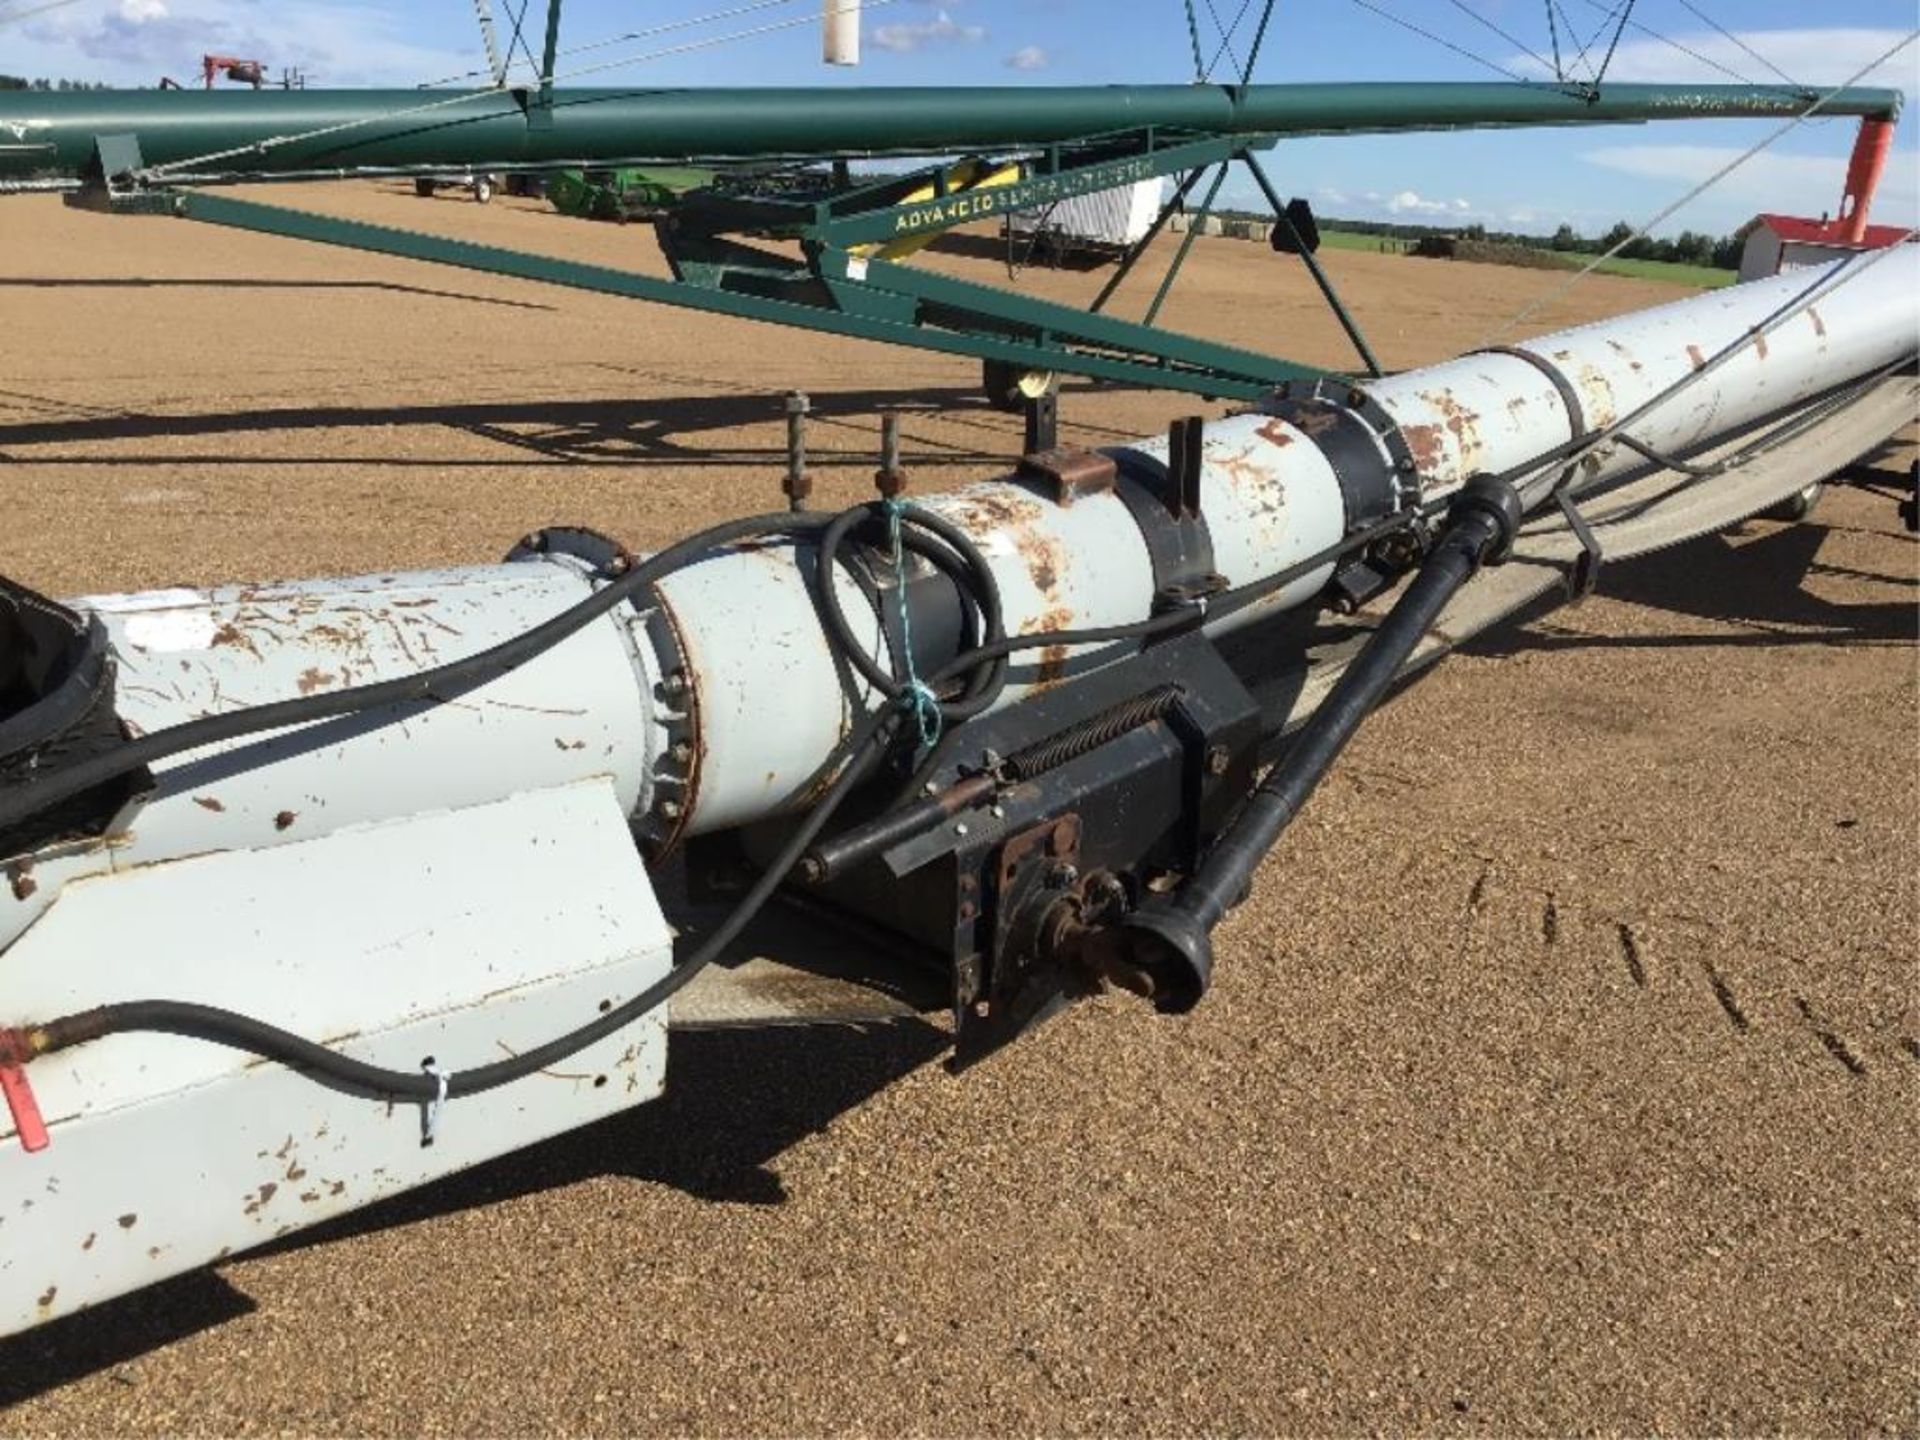 Convey All 14 X 65Ft PTO Drive Grain Conveyor s/n 7897874 540PTO, c/w Brand New Belt valued at $3, - Image 3 of 11